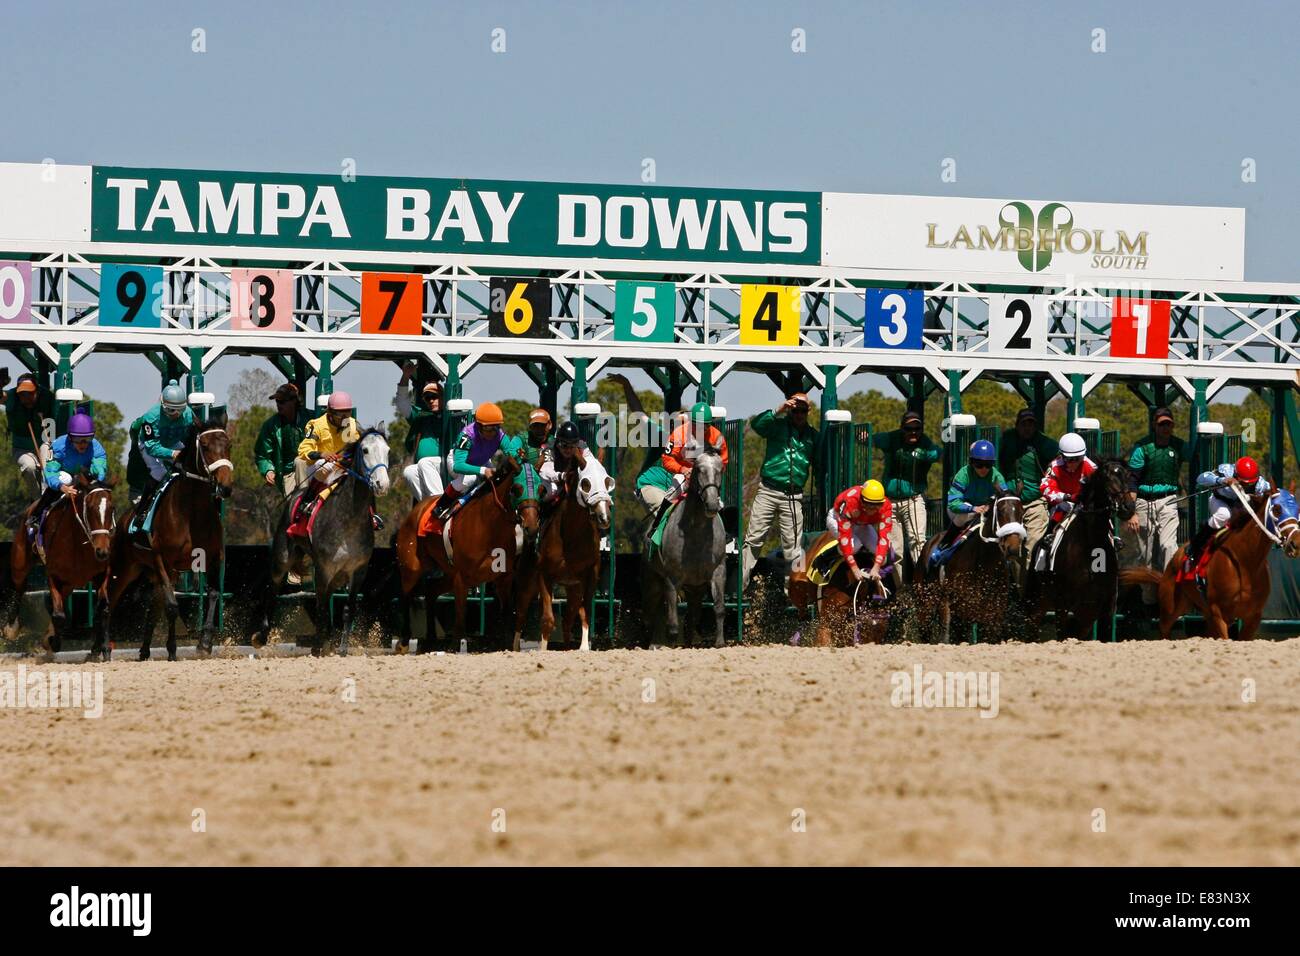 Jockeys In Starting Gate High Resolution Stock Photography And Images Alamy